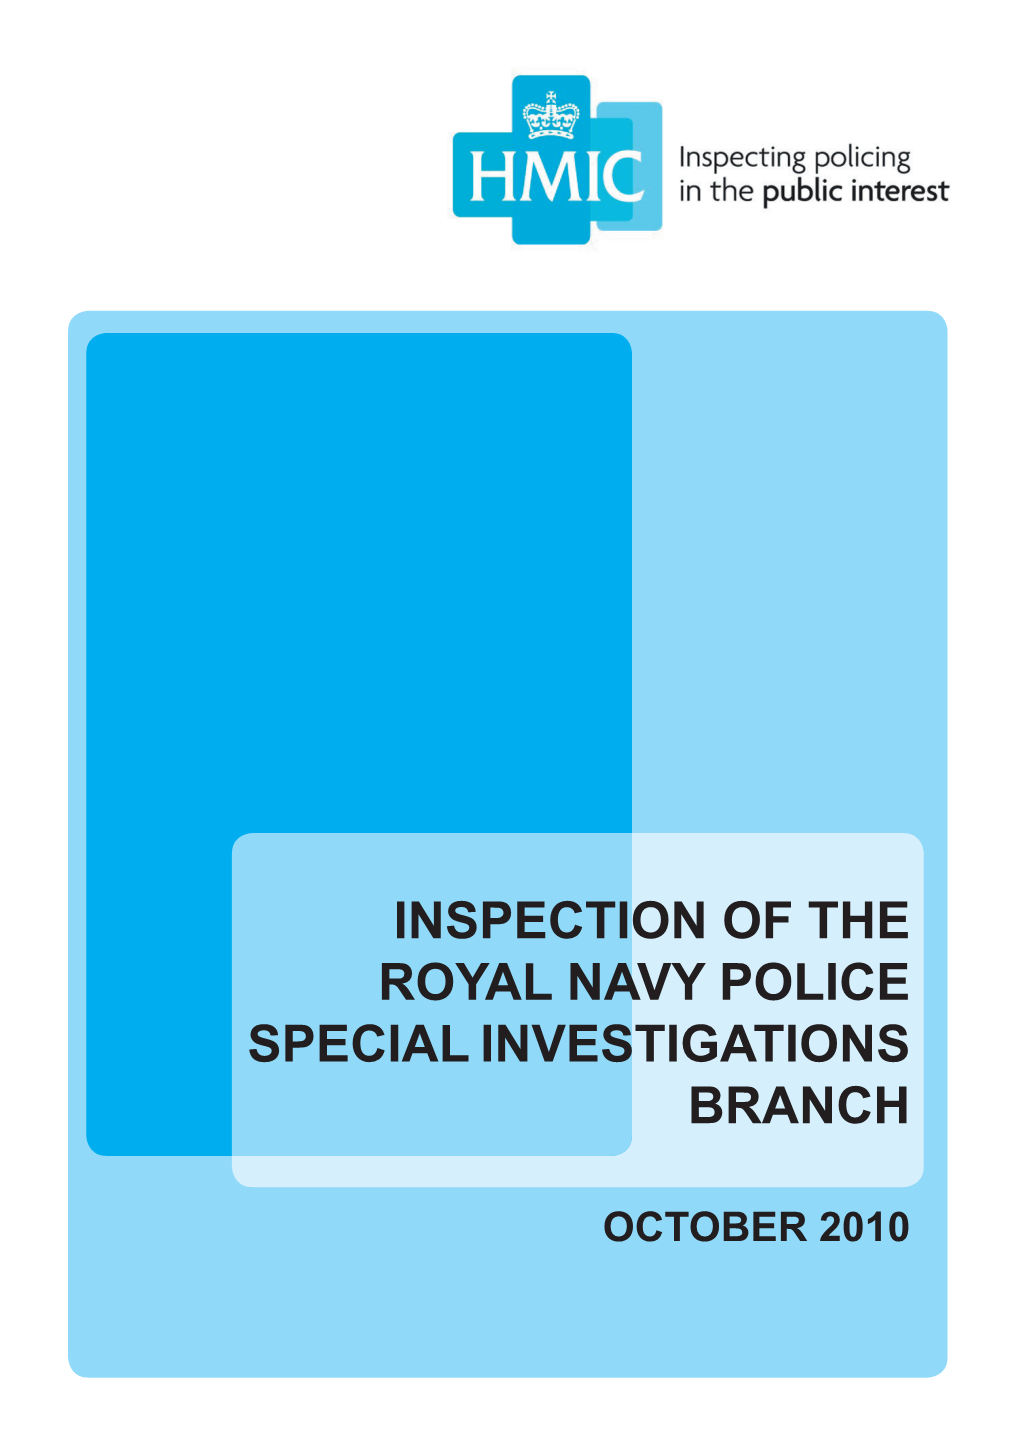 Inspection of the Royal Navy Police Special Investigations Branch